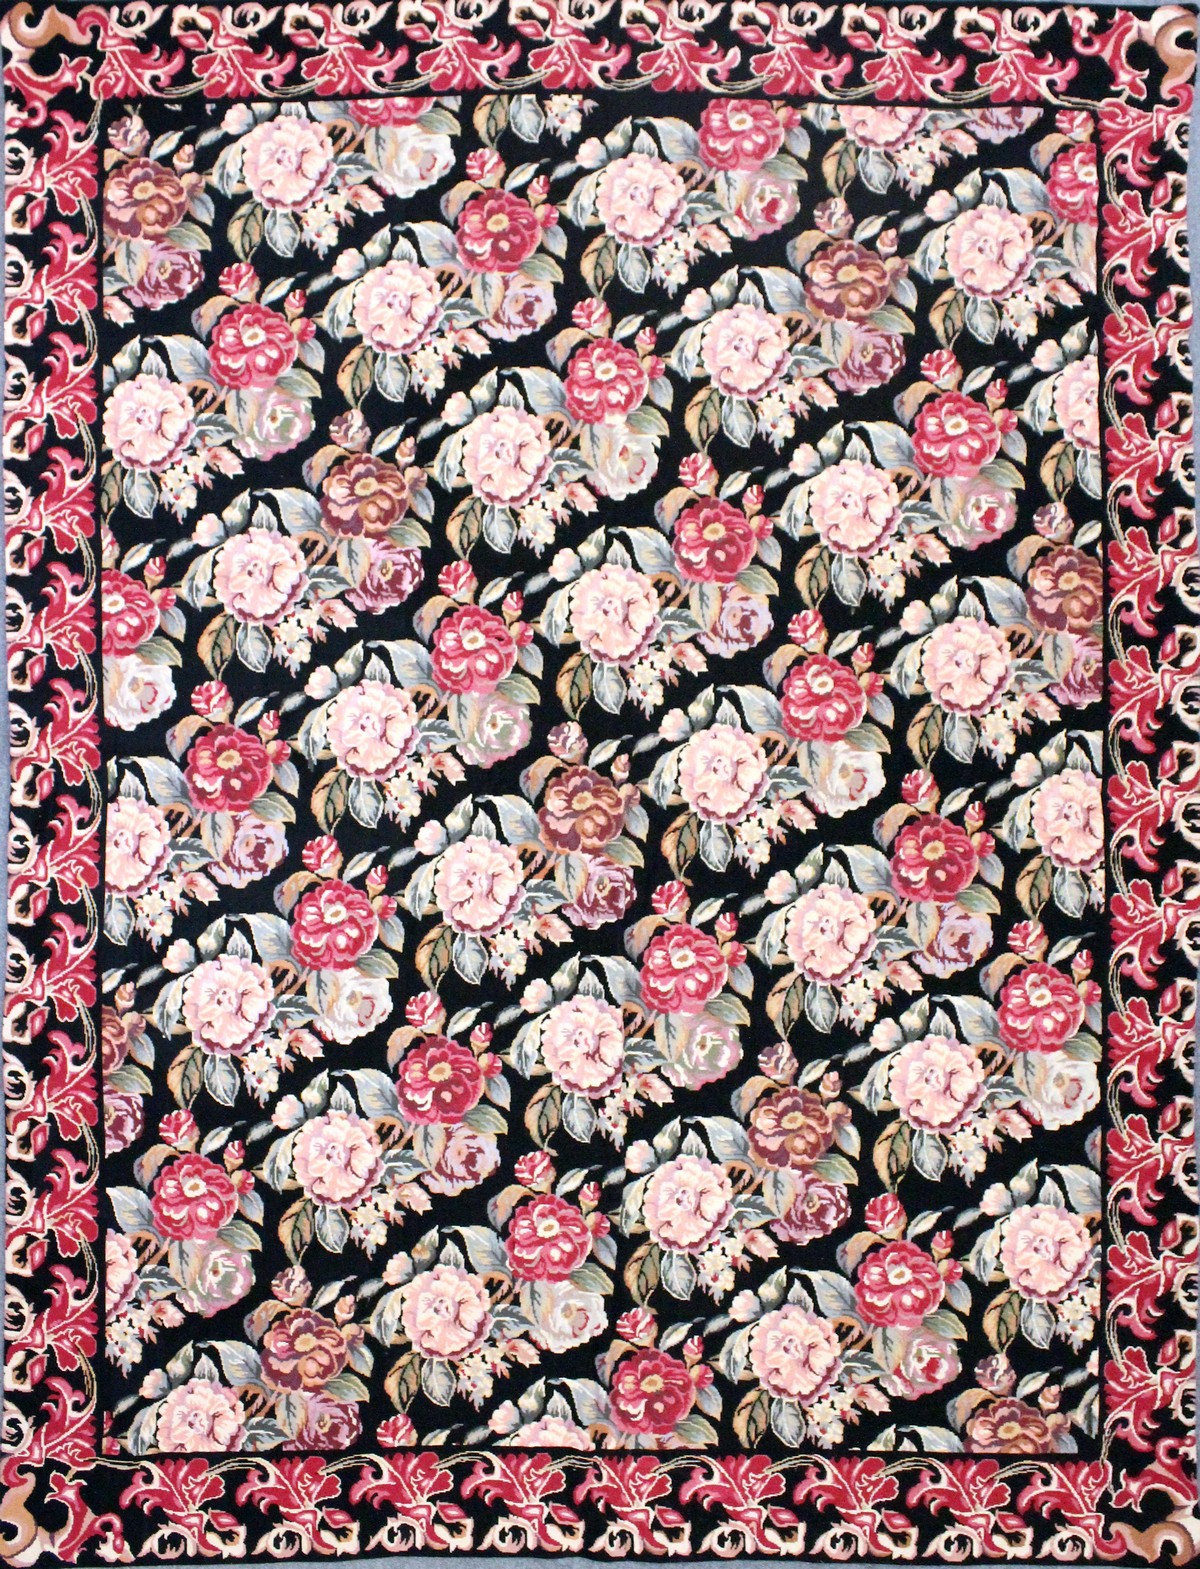 A LARGE AUBUSSON STYLE WOOLWORK TAPESTRY WALL HANGING, black ground with all-over floral decoration.